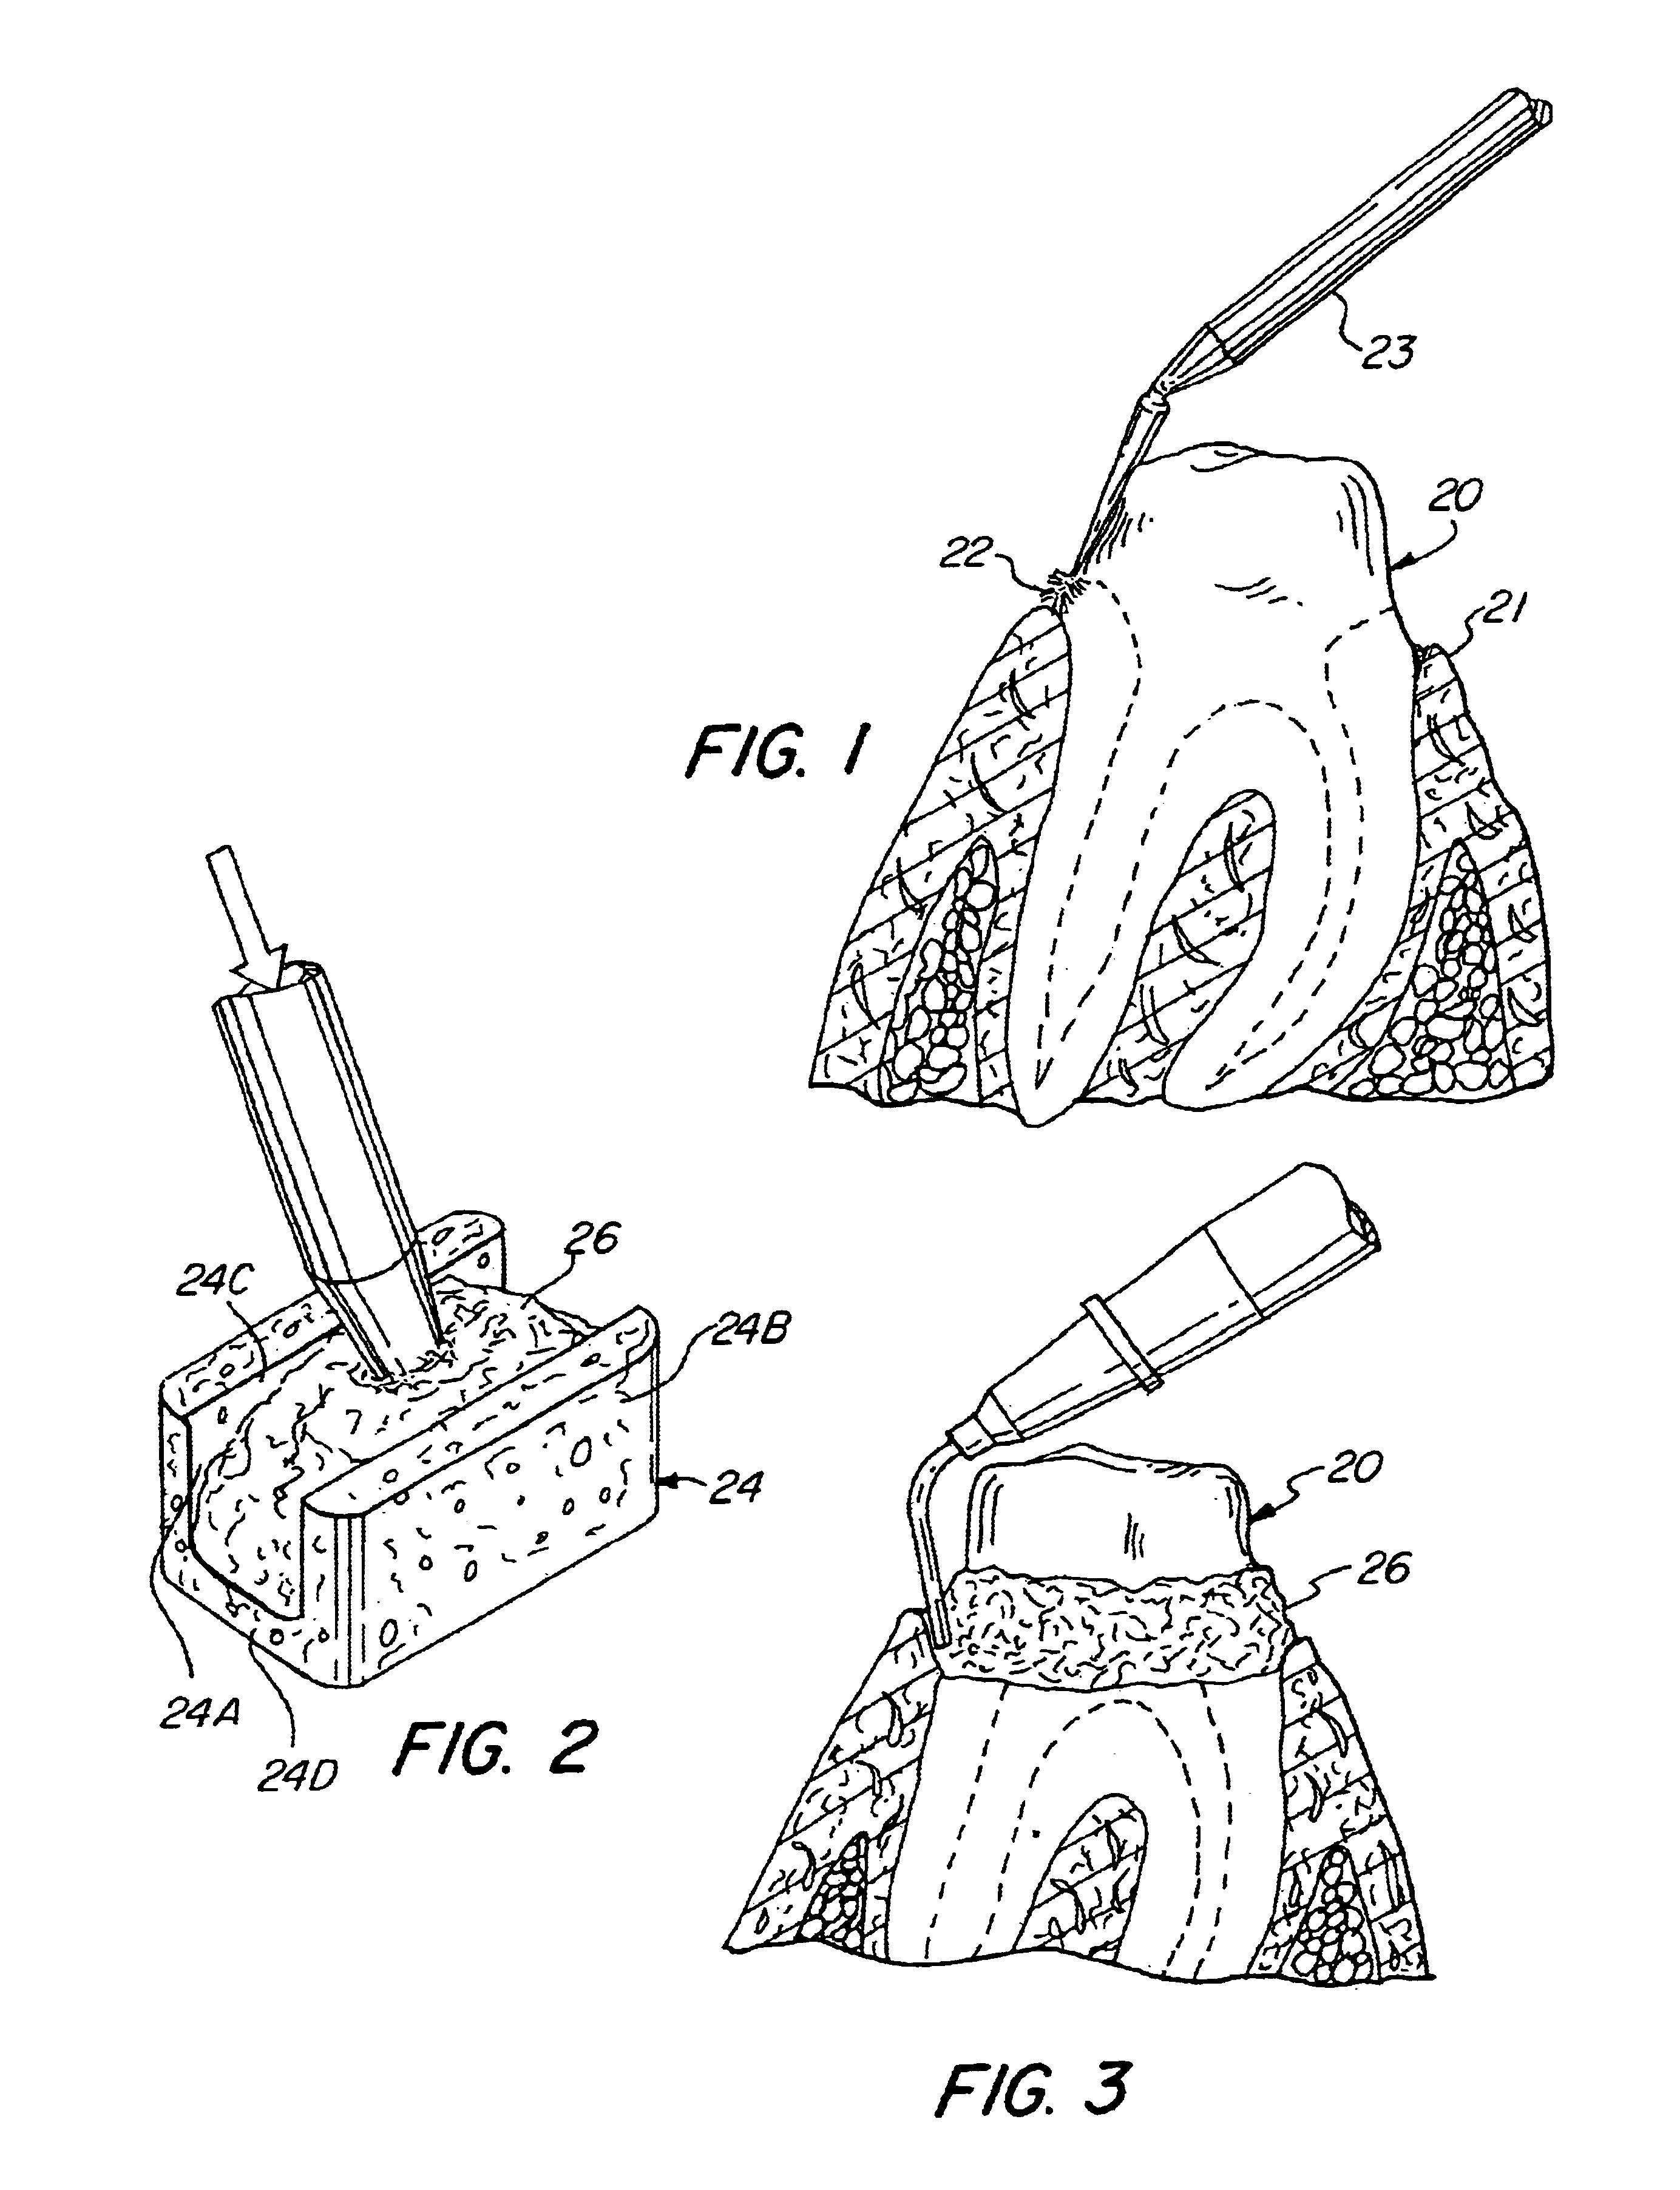 Method and device for the retraction and hemostasis of tissue during crown and bridge procedures